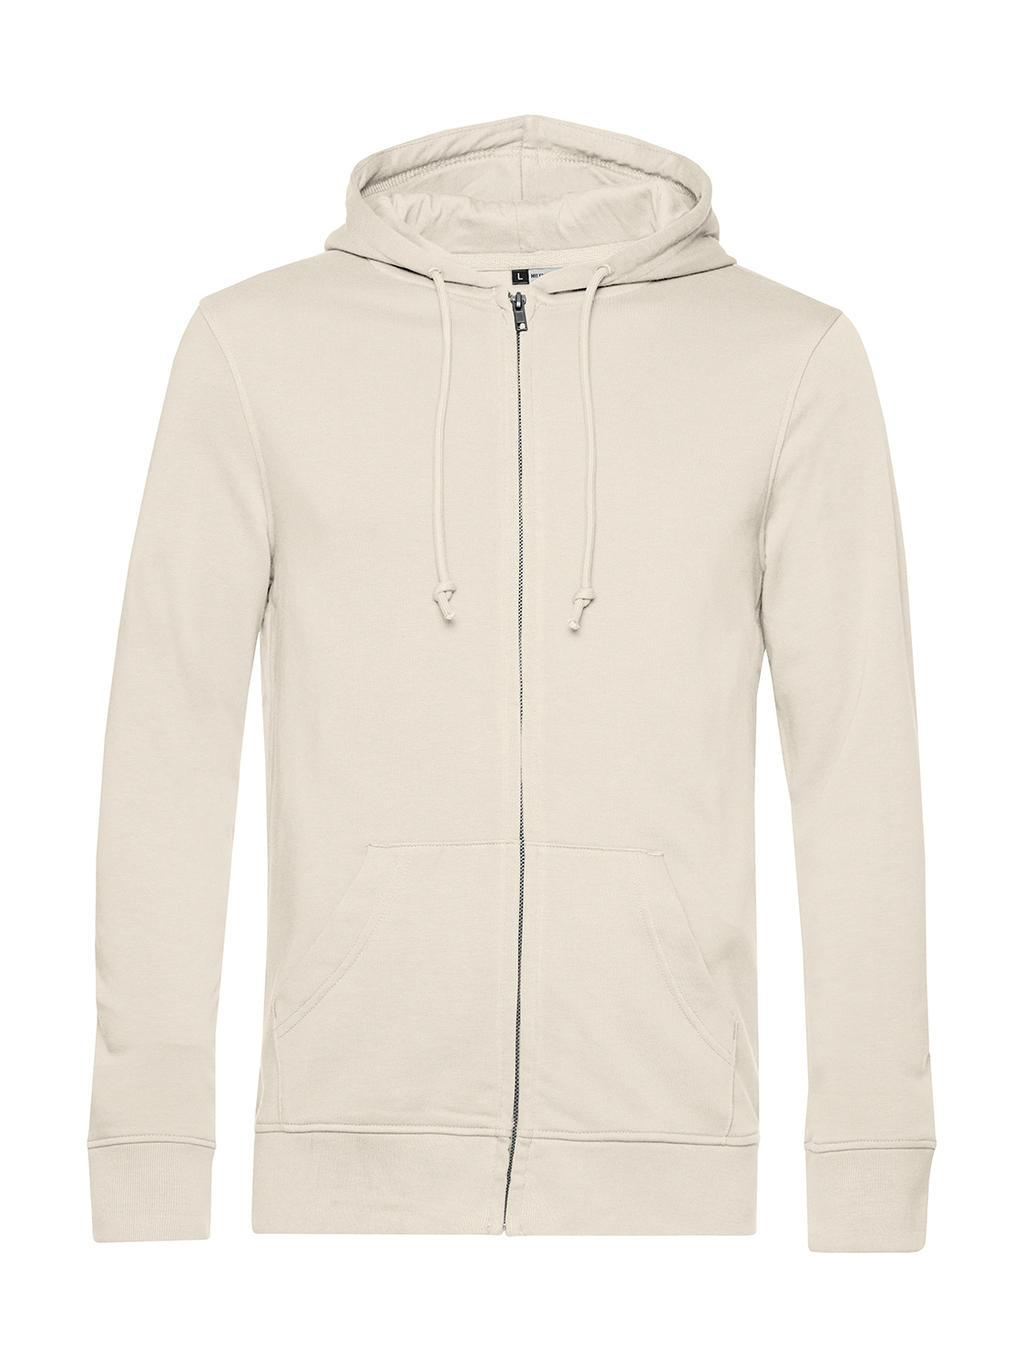  Organic Inspire Zipped Hood_? in Farbe Off White